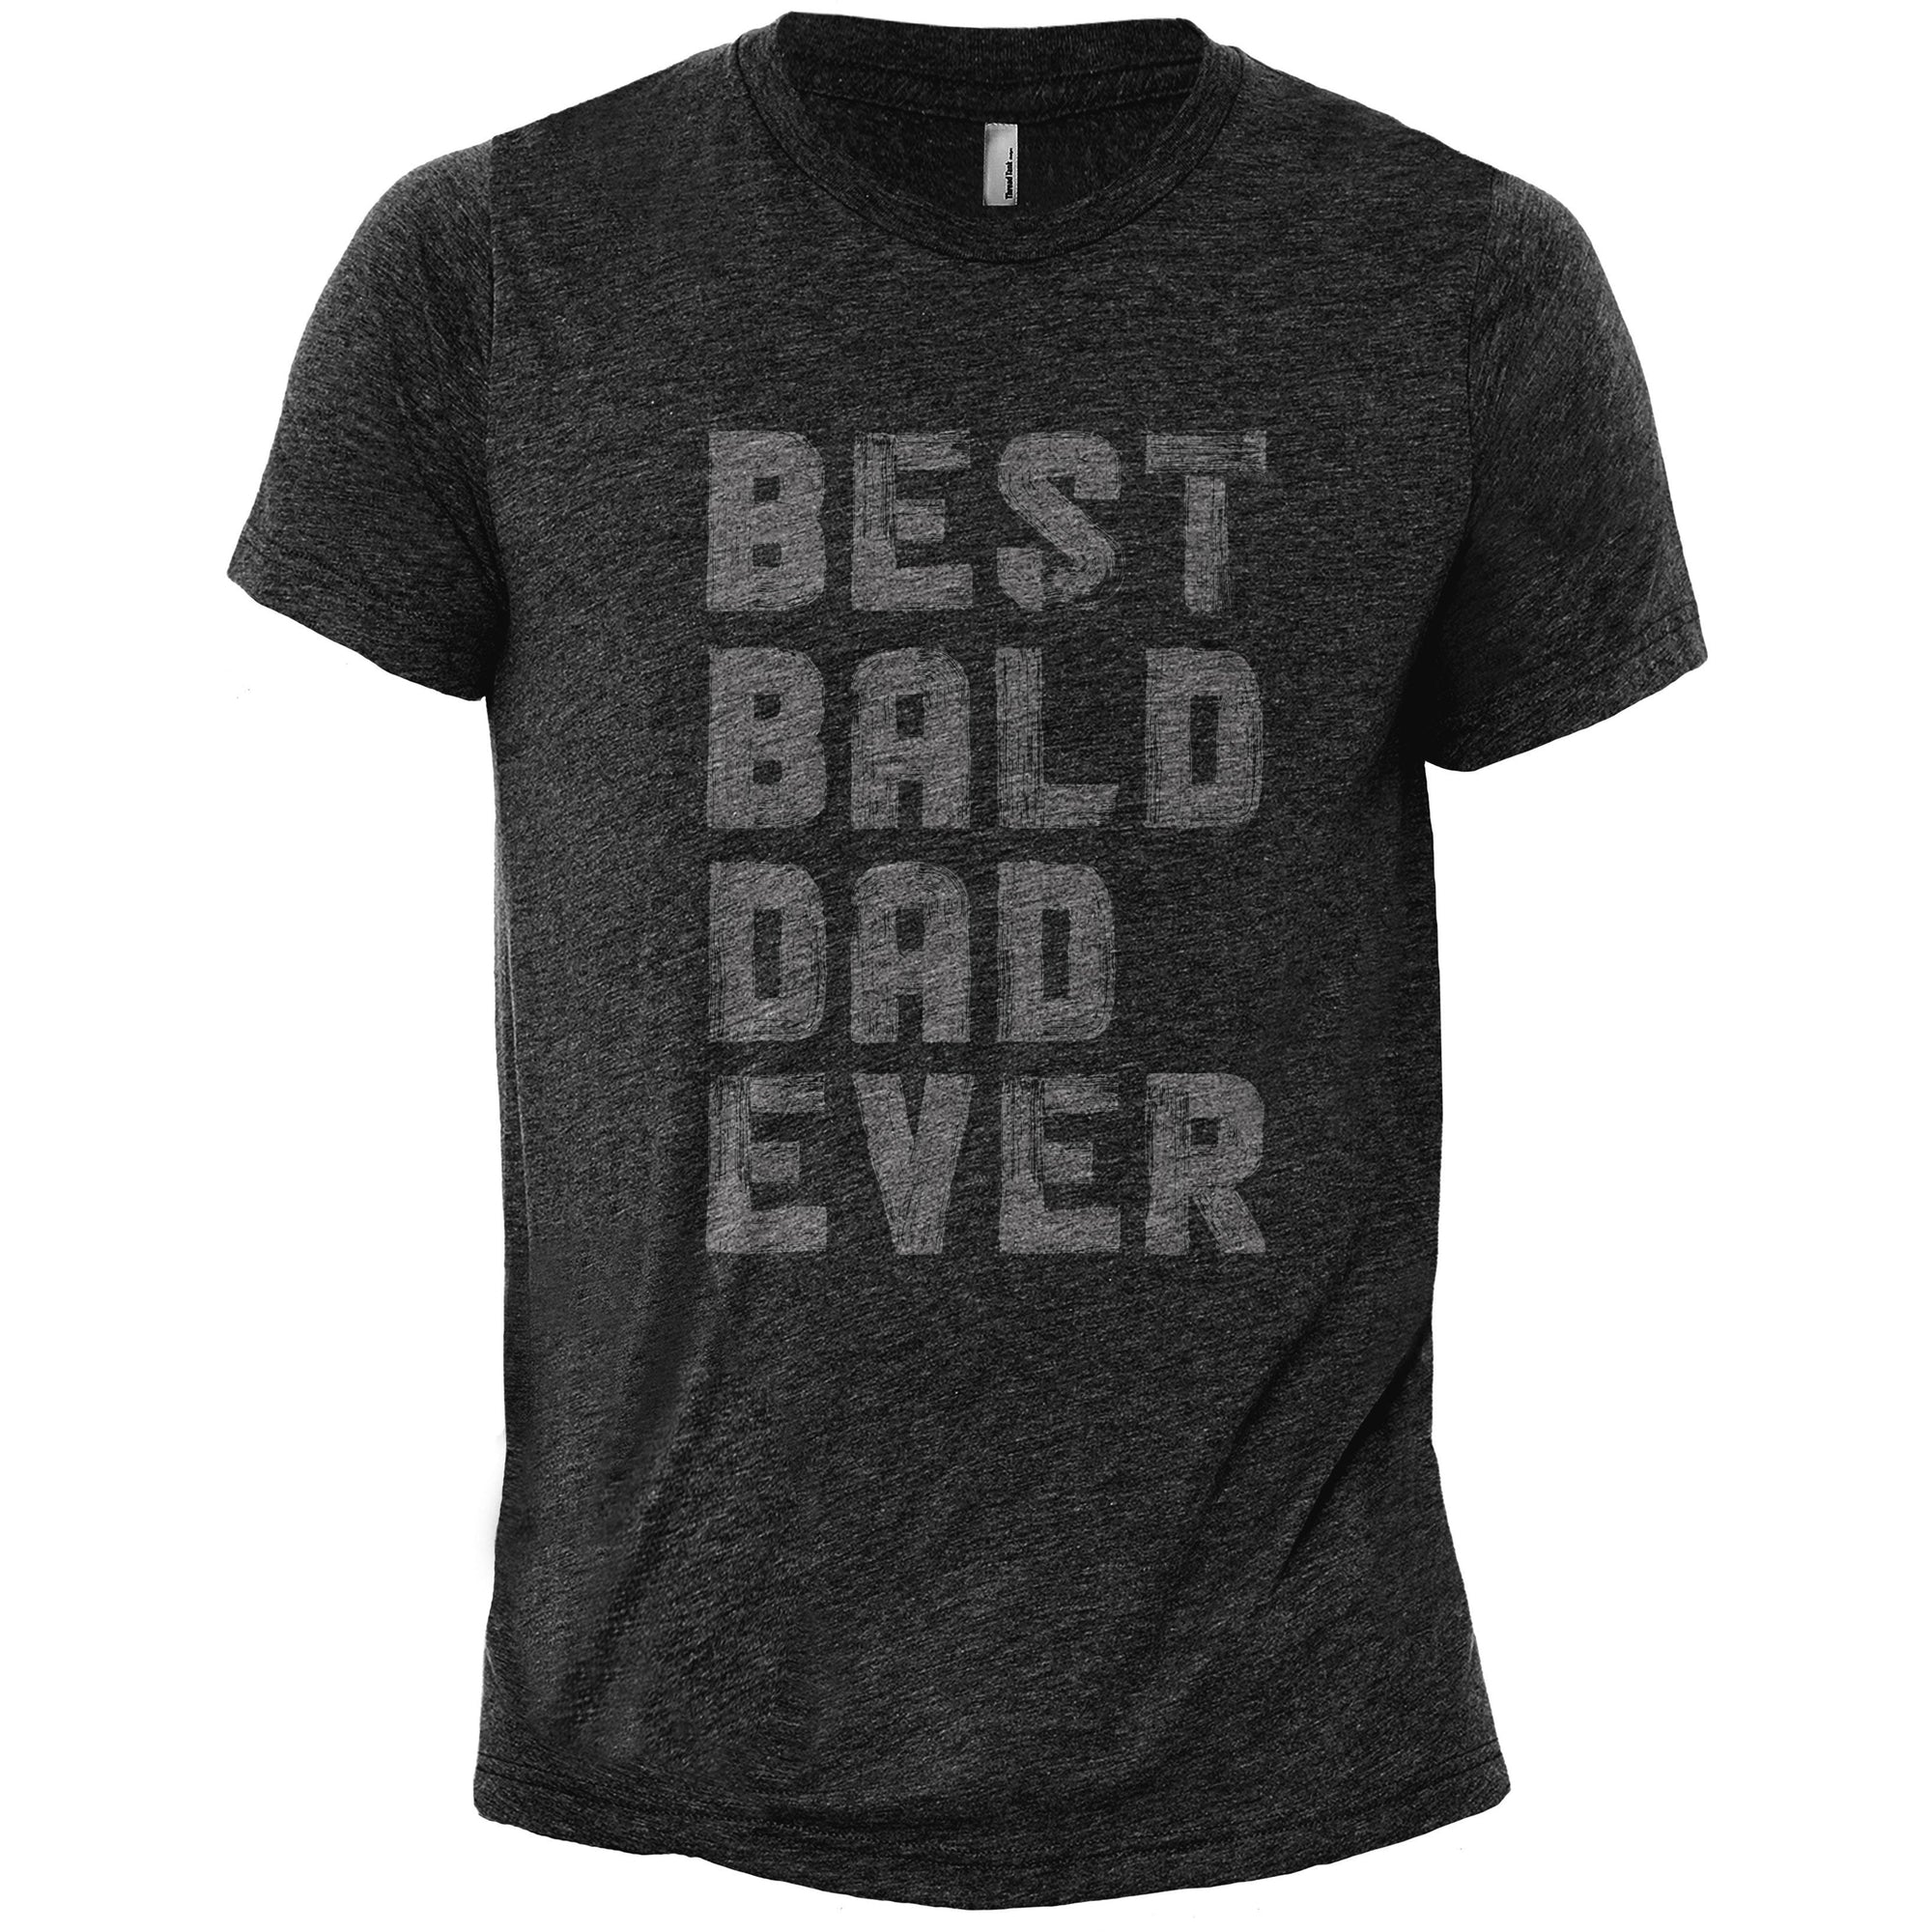 Best Bald Dad Ever - Stories You Can Wear